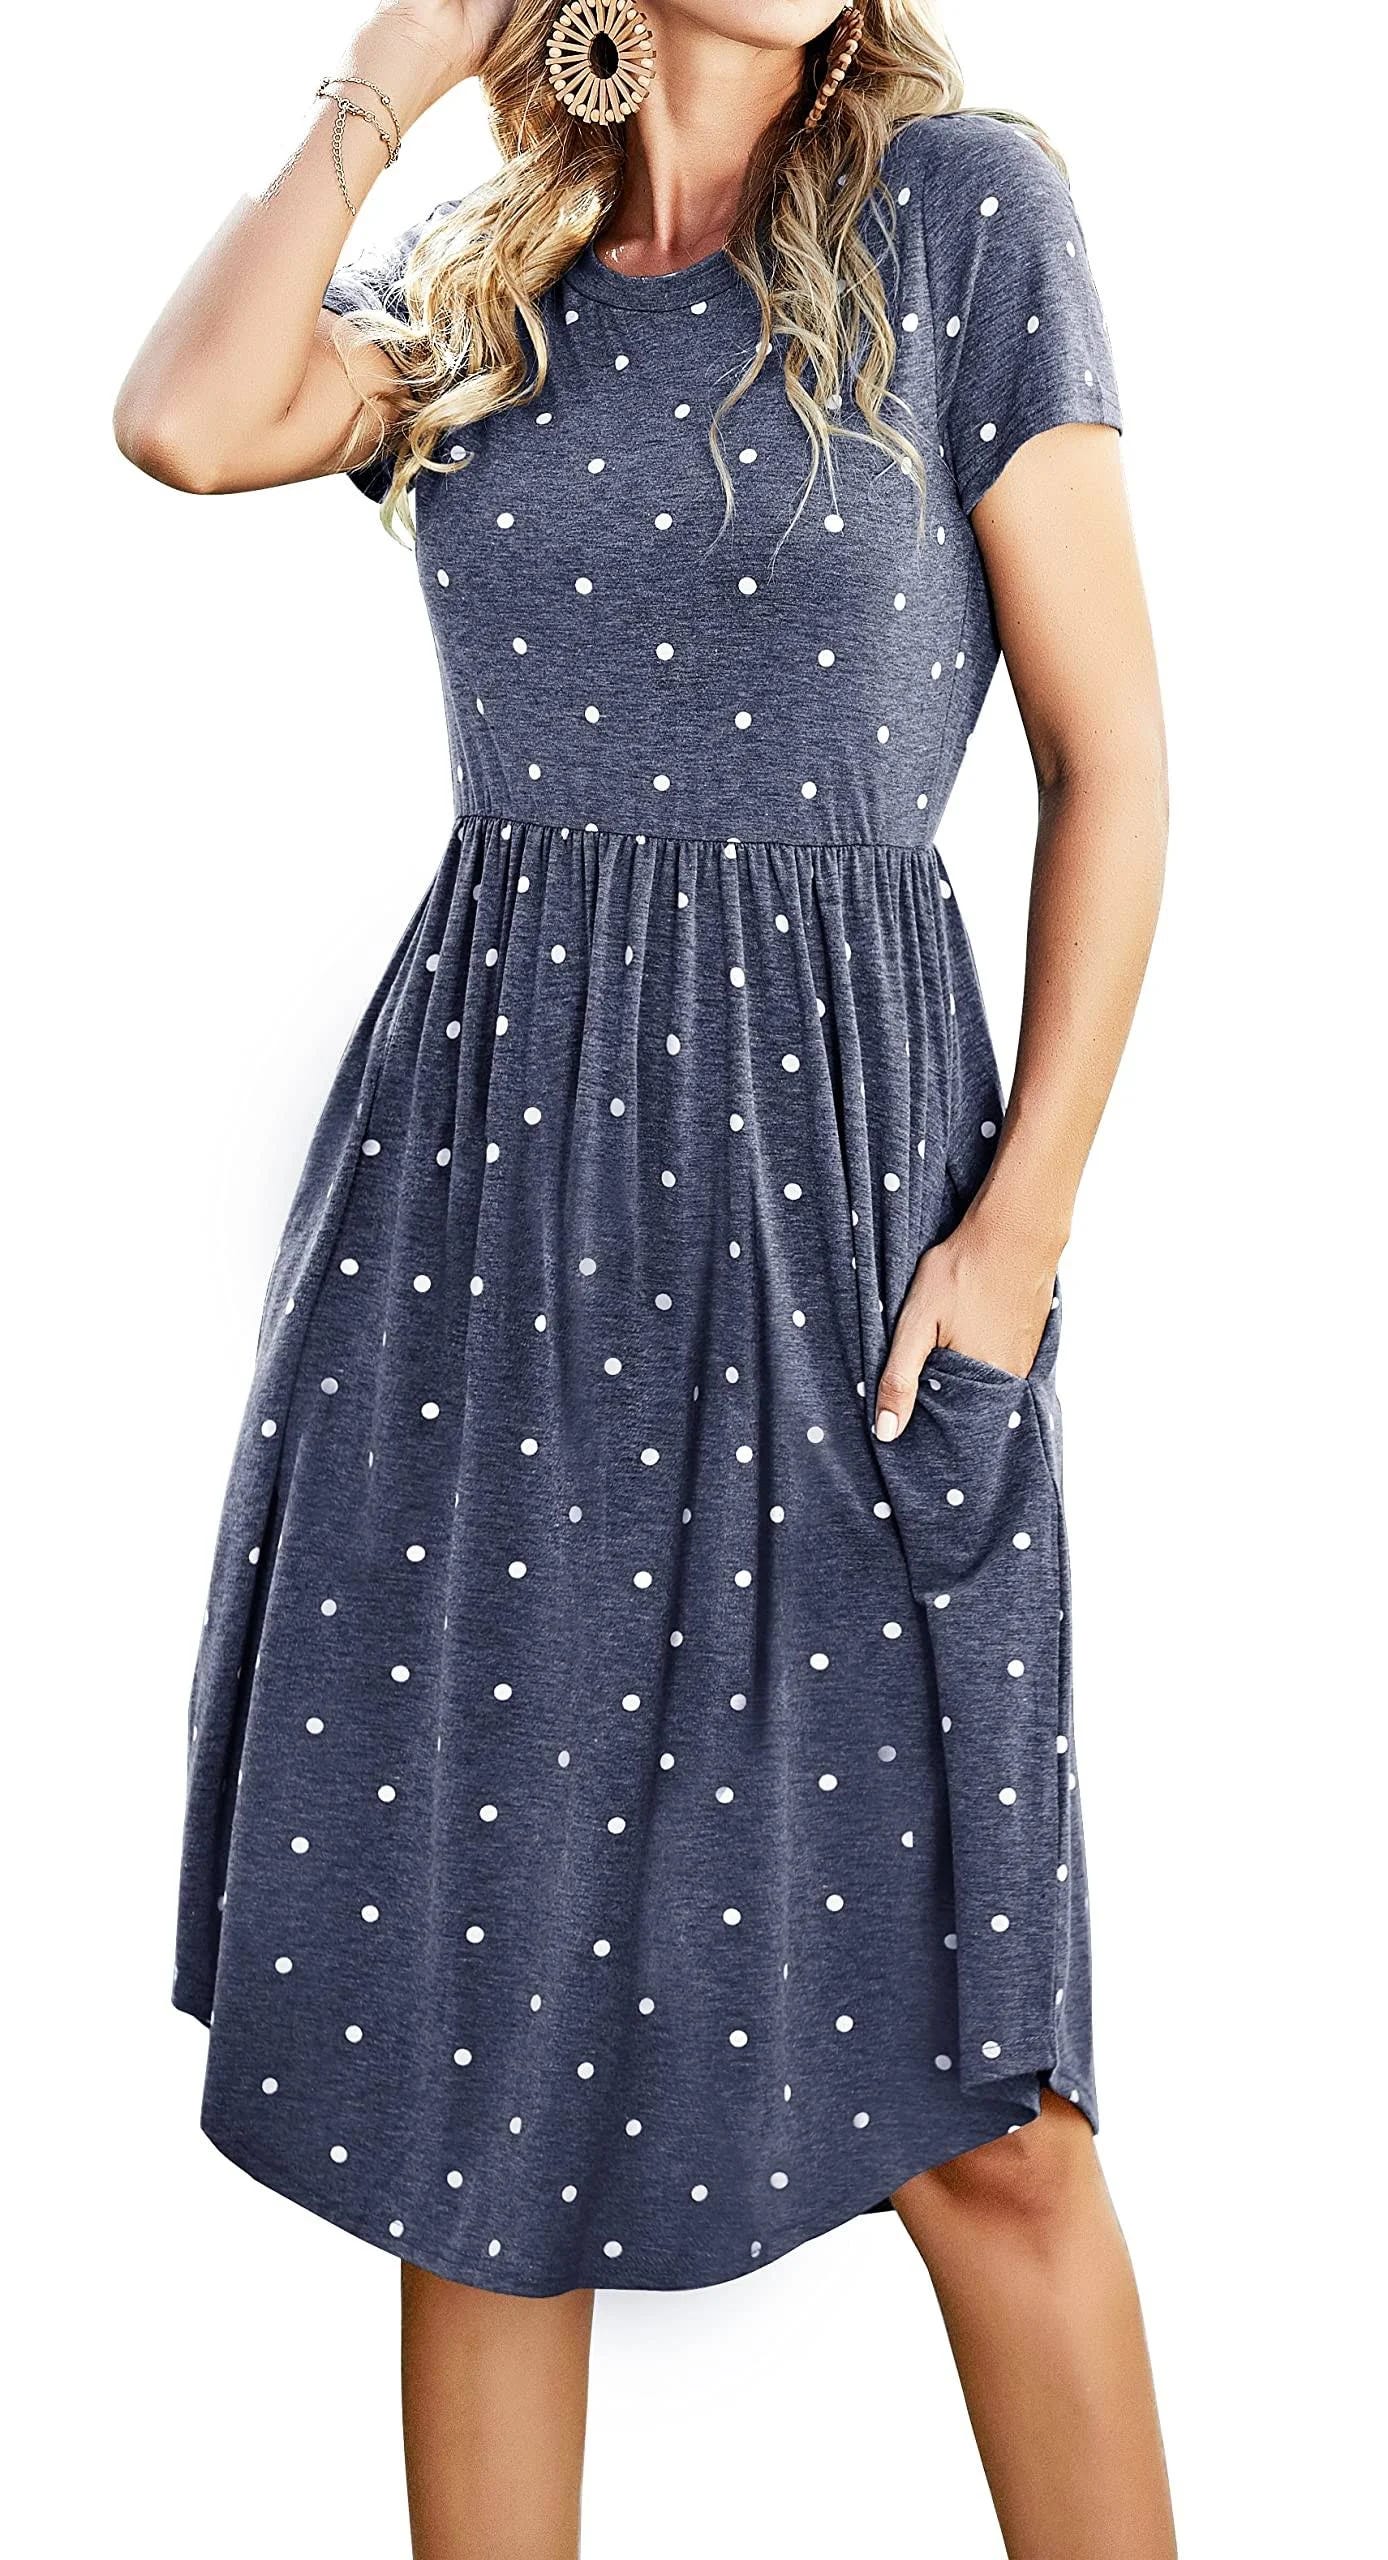 Comfortable and Breathable Empire Waist Summer Dress | Image